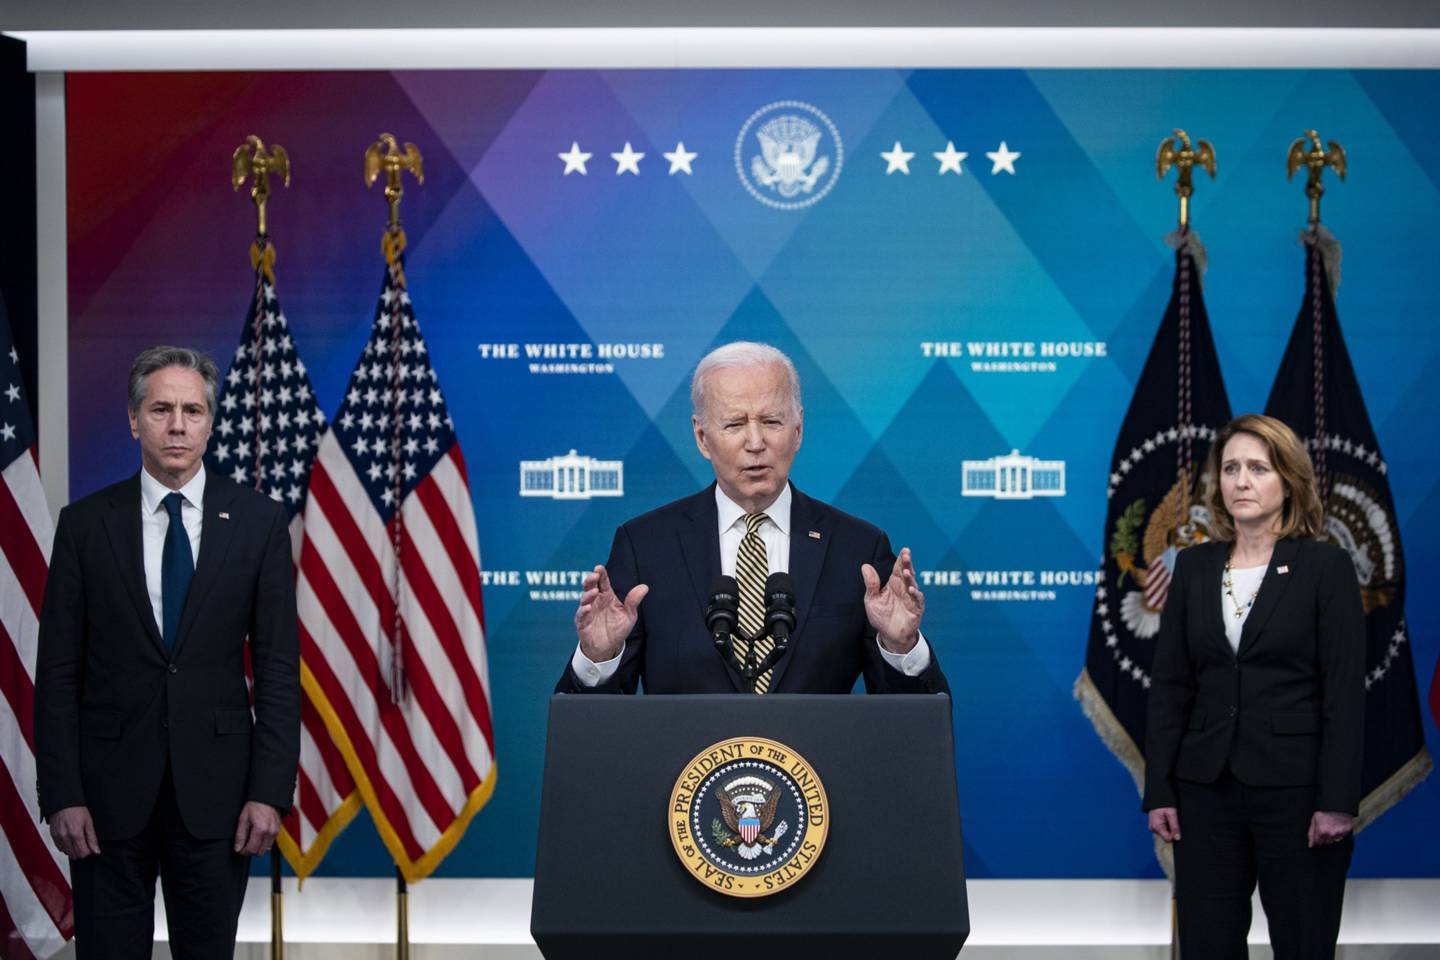 U.S. President Joe Biden speaks as Kathleen Hicks, deputy secretary of defense, right, and Antony Blinken, U.S. secretary of state, listen in the Eisenhower Executive Office Building in Washington, D.C., U.S., on Wednesday, March 16, 2022. Biden outlined the United States' assistance to Ukraine following an emotional appeal from Ukrainian President Volodymyr Zelenskiy for Biden to lead the world in punishing Moscow for its invasion. Photographer: Al Drago/Bloomberg